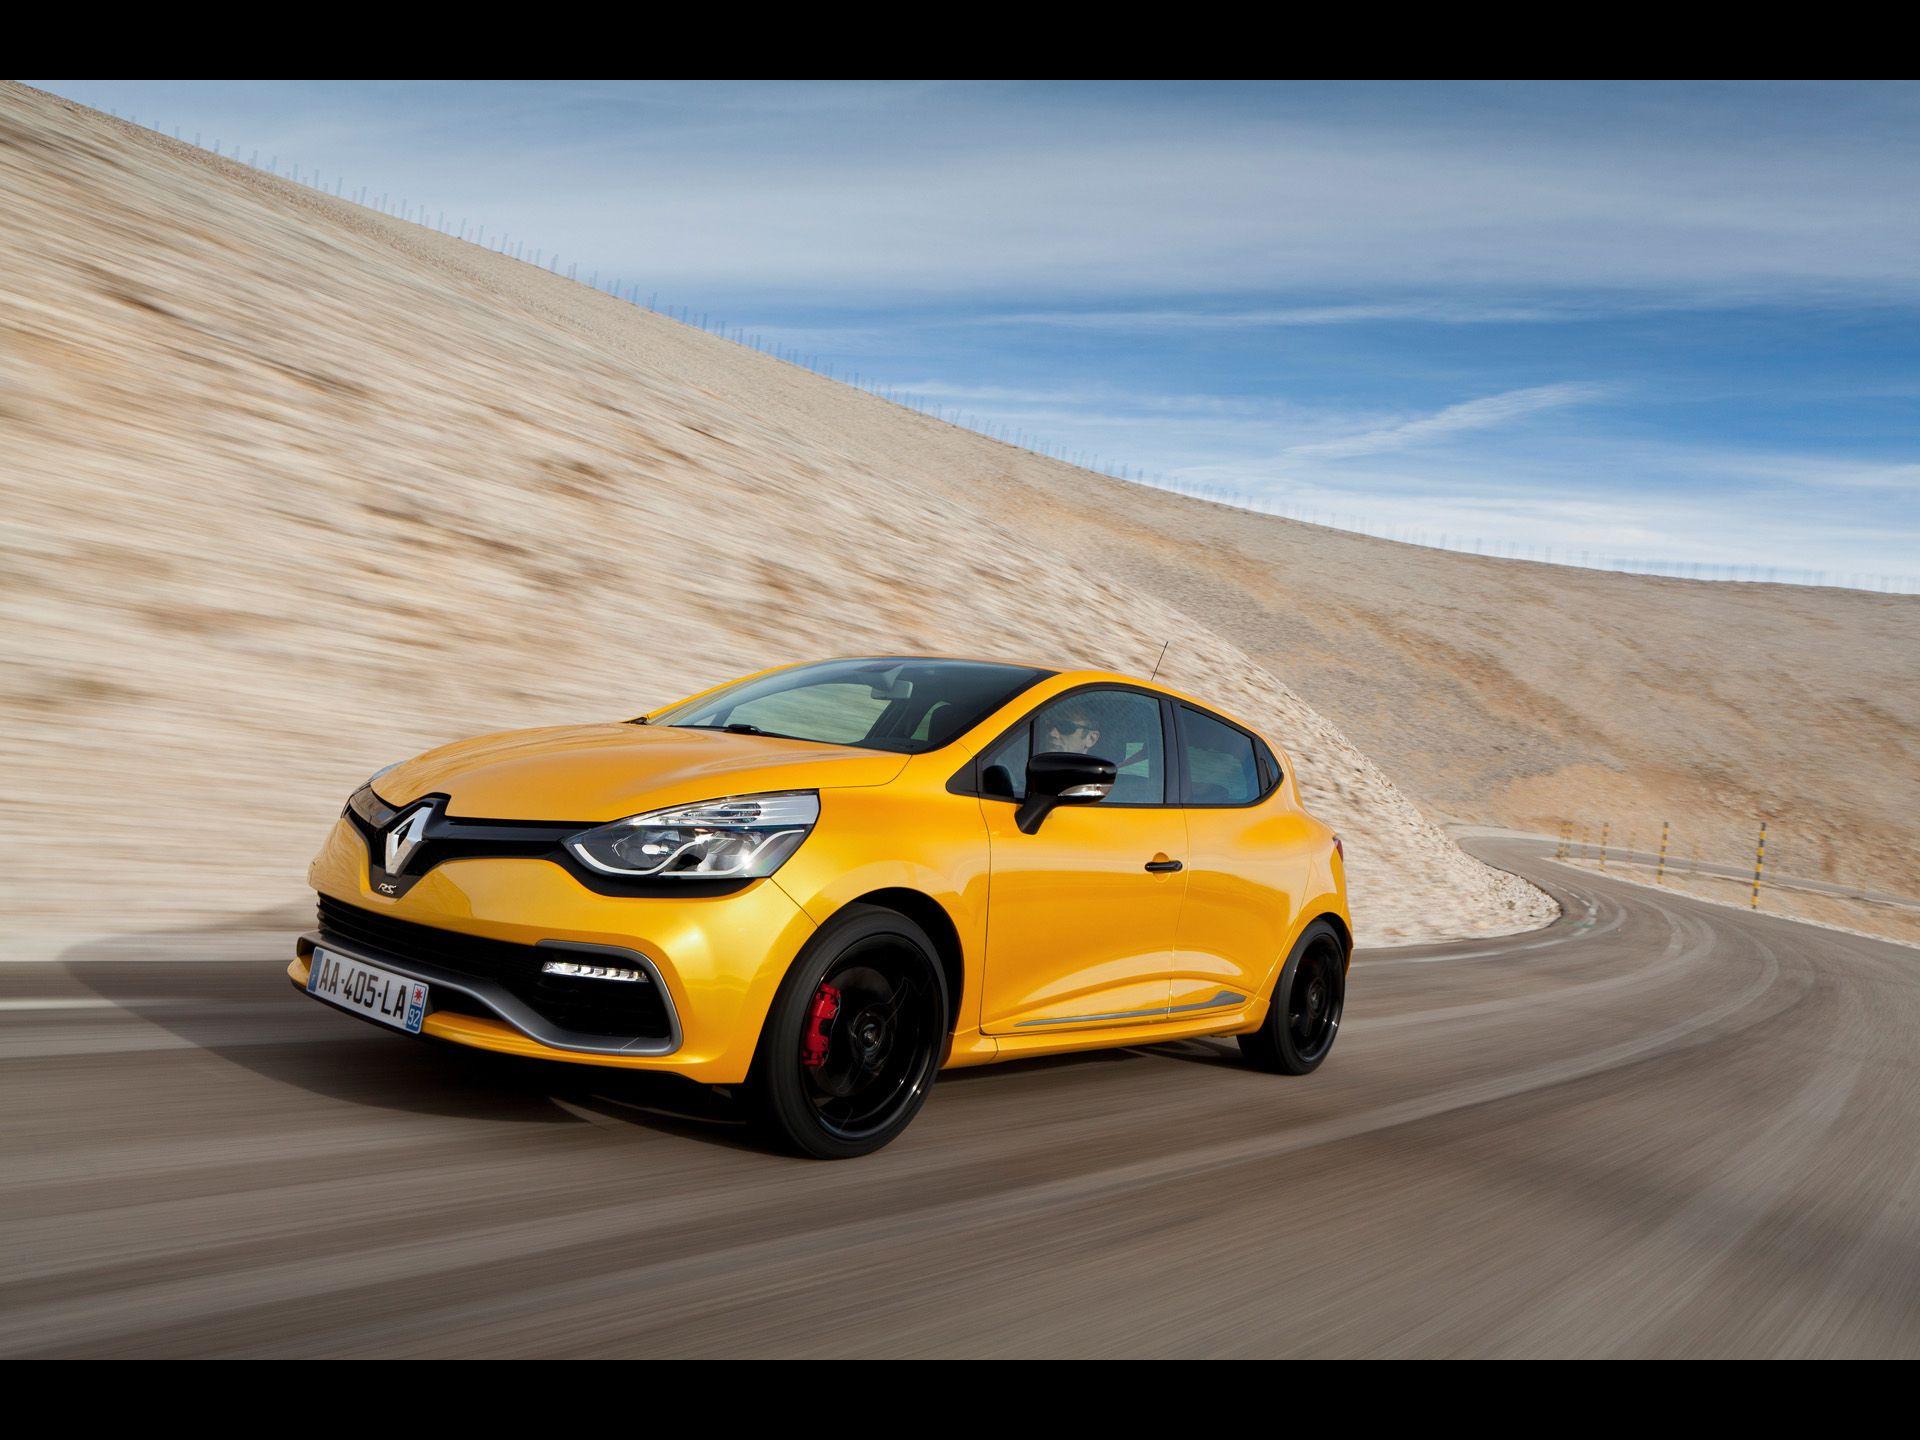 Renault Clio RS 200 EDC Motion Front Angle wallpaper